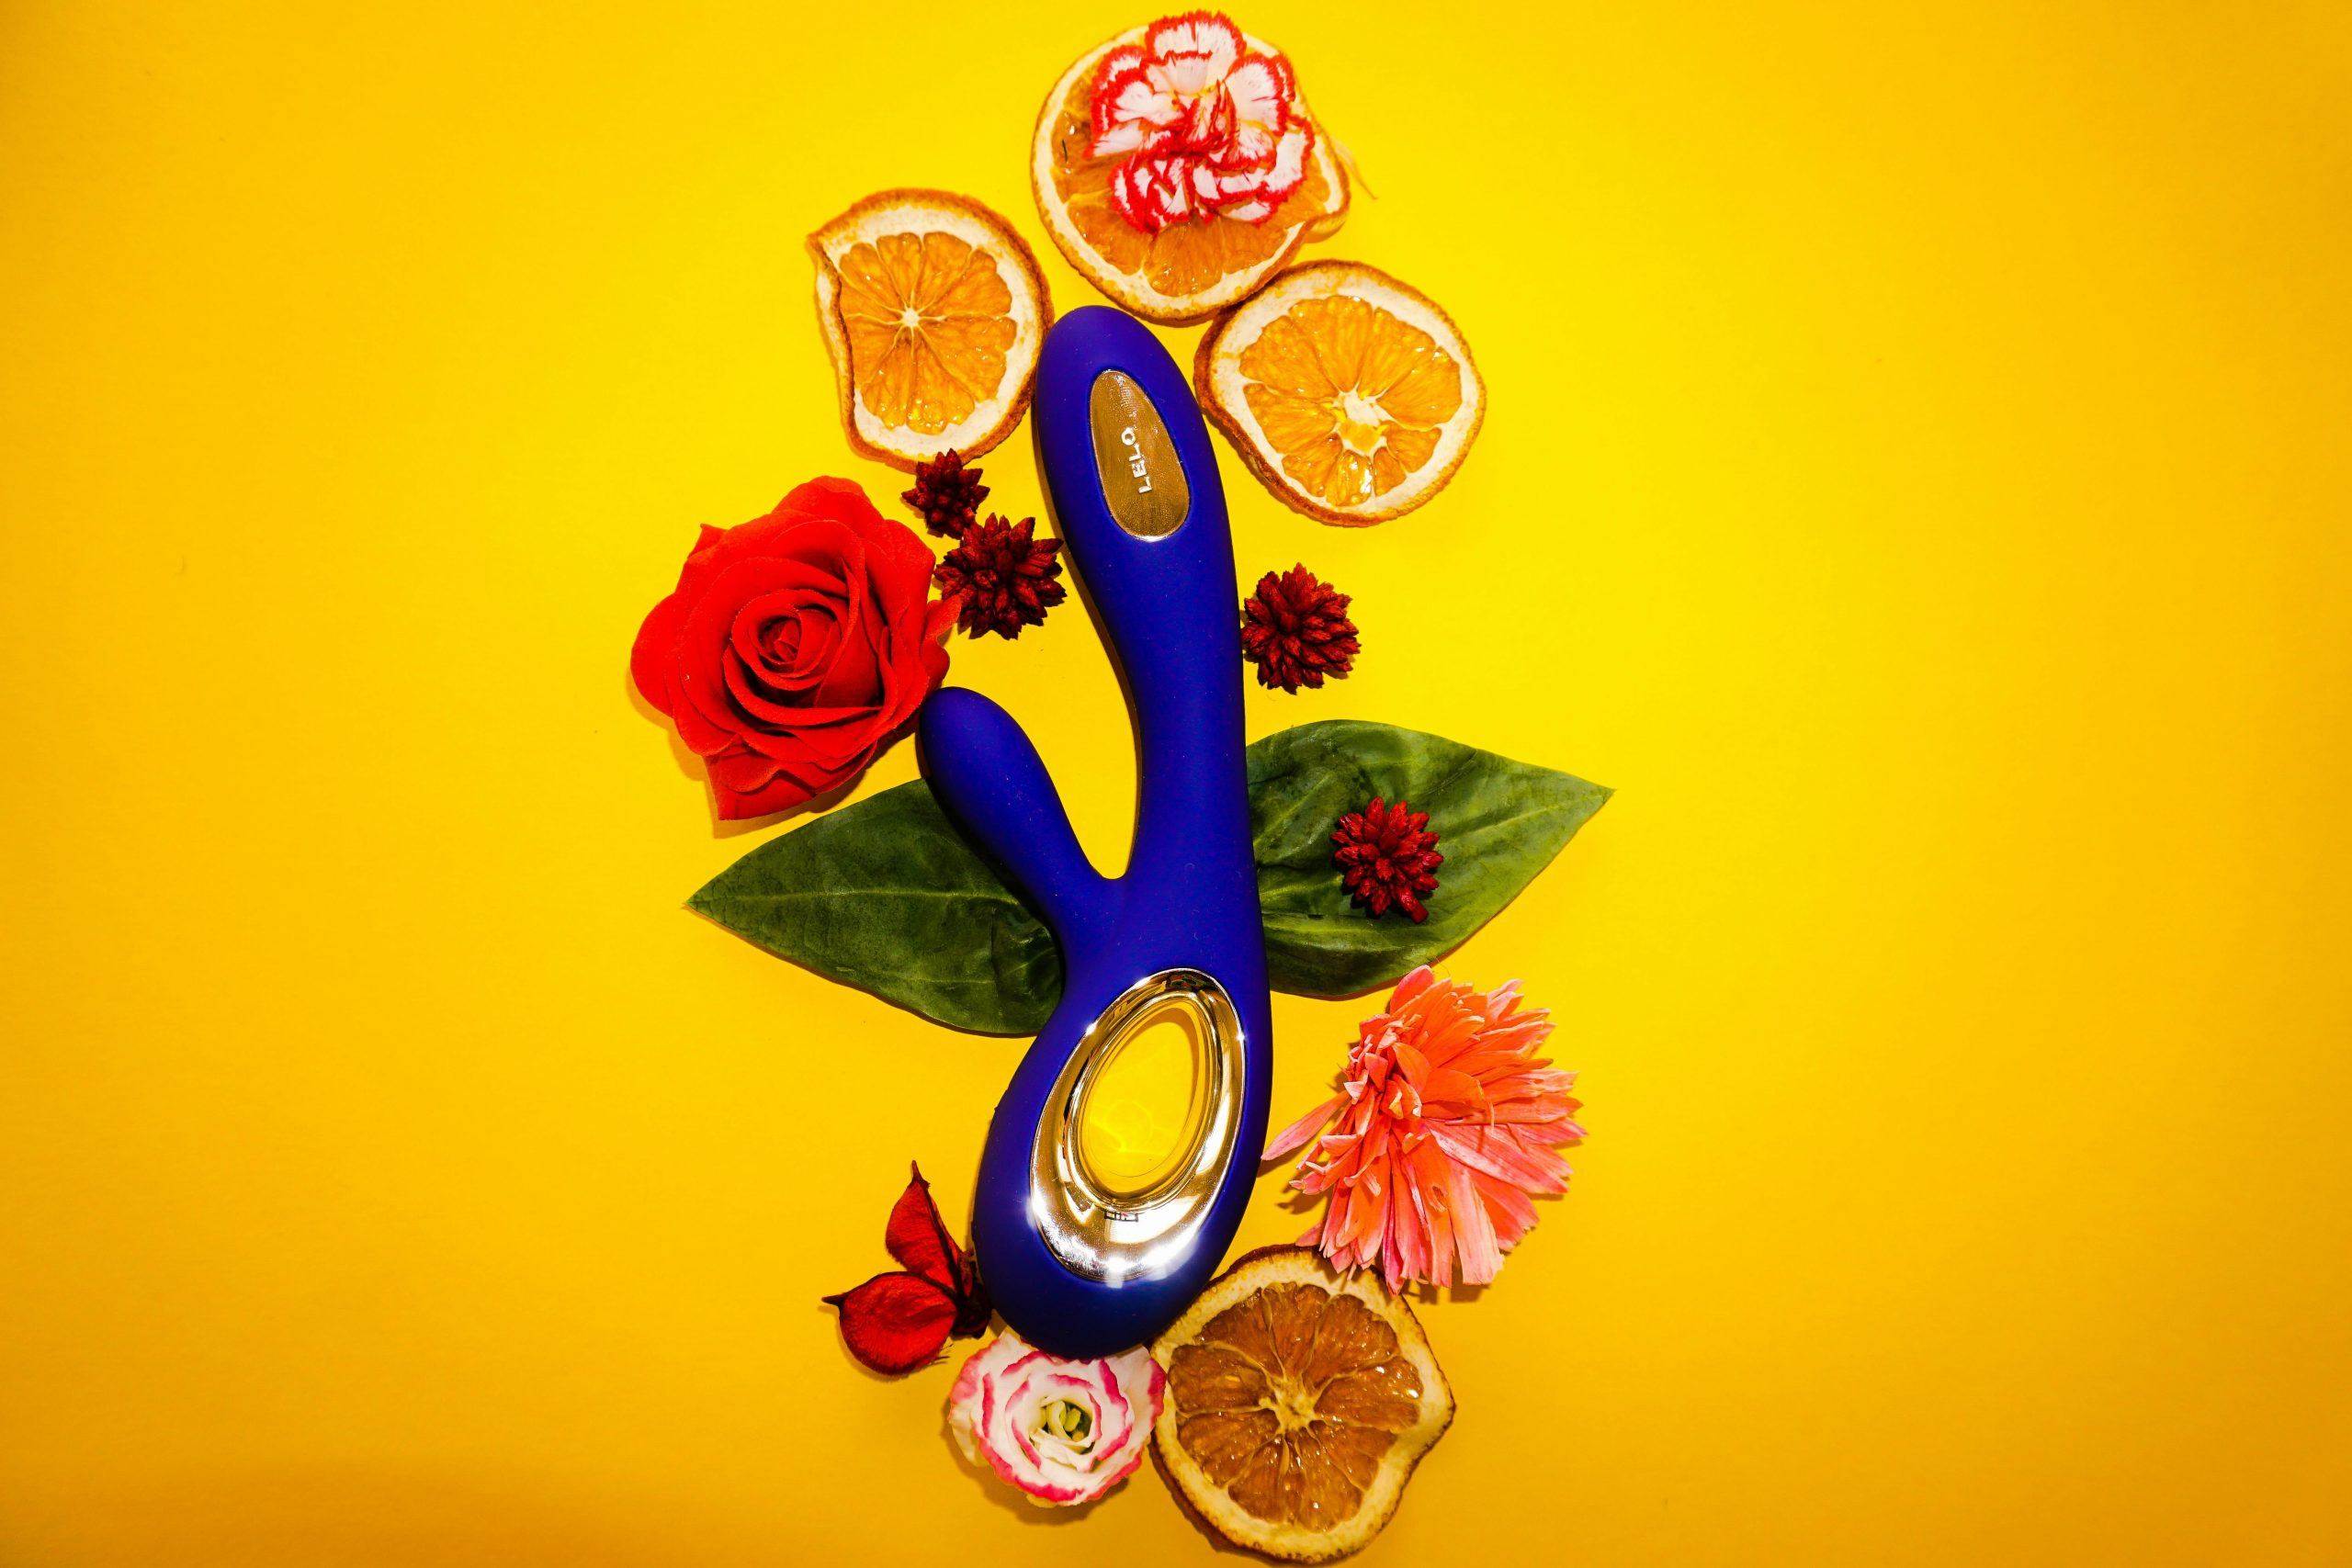 lelo sex toy with flowers and fruit